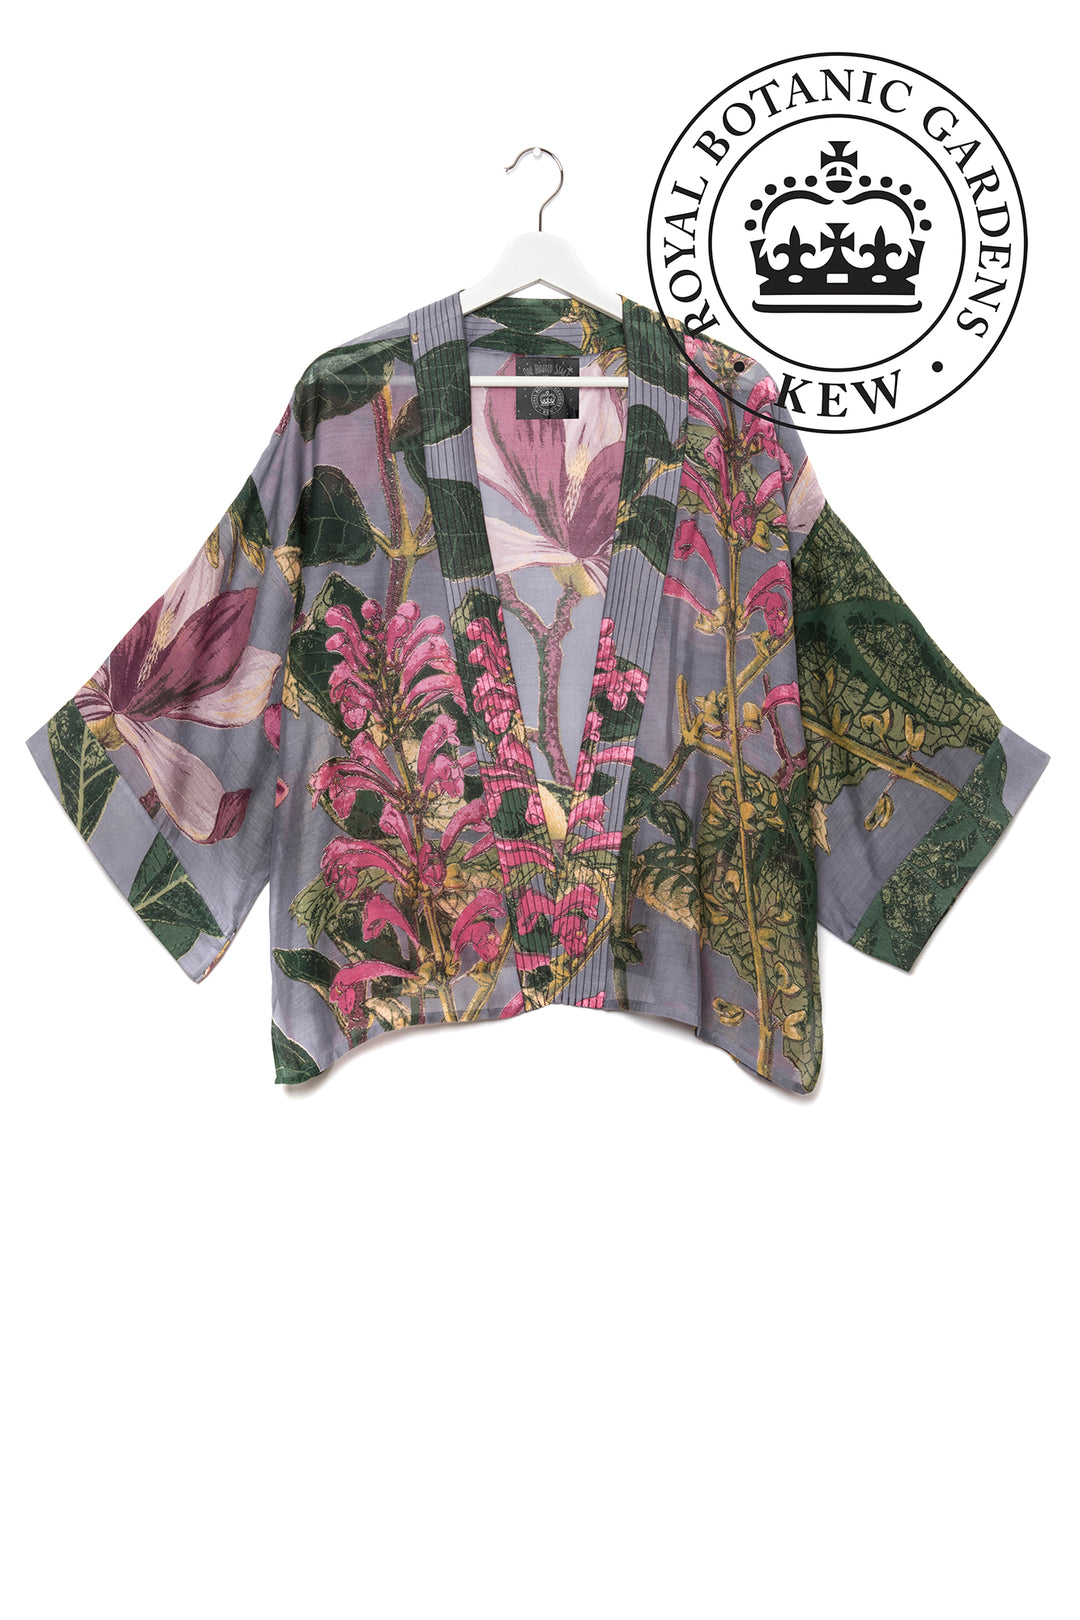 KEW Magnolia Grey Kimono- Our bestselling kimono jackets have loose ¾ length sleeves, an open front and a lightly embroidered lapel. Pair with a matching camisole and your favourite jeans in summer or layer over a polo neck during the cooler months.